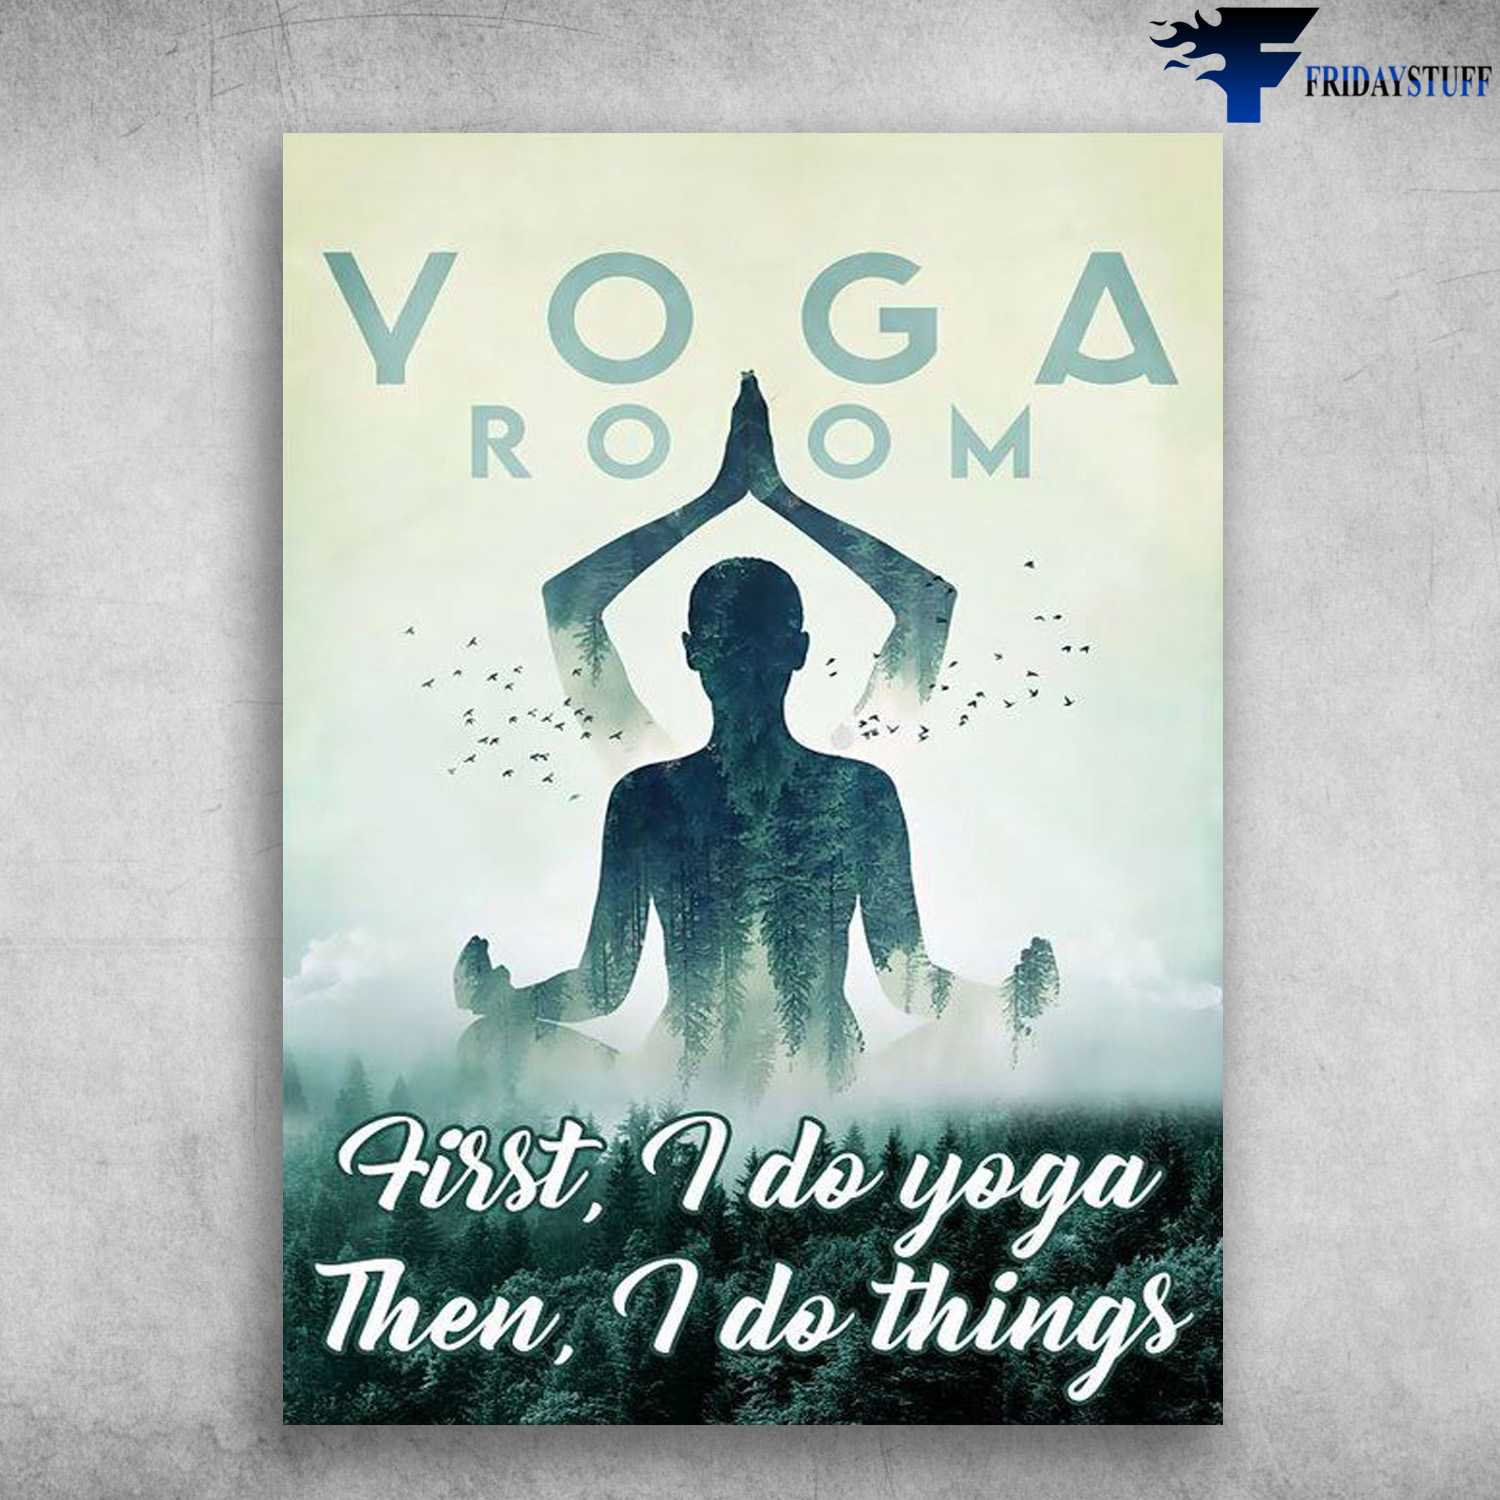 Yoga Room, Yoga Poster, First I Do Yoga, Then I Do Things